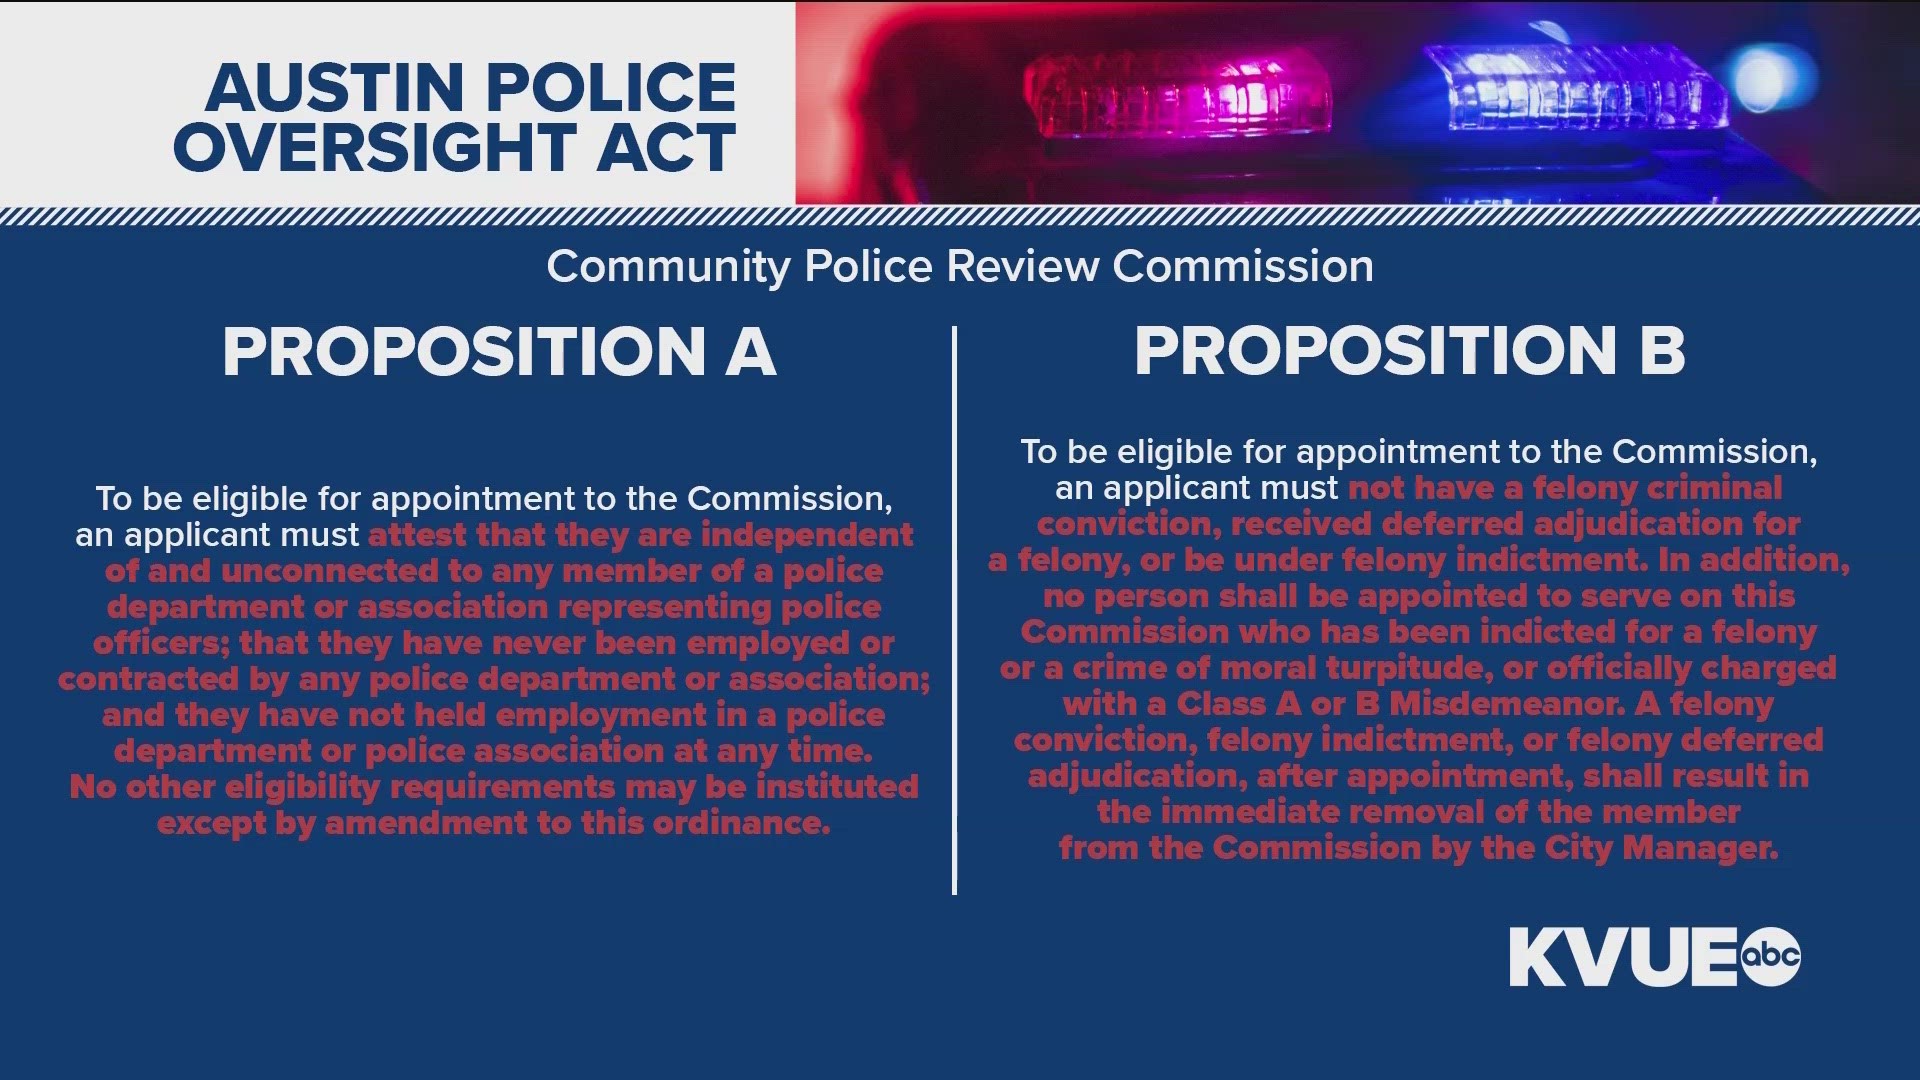 Austin voters are deciding if they want to enact a new ordinance to regulate police oversight. If so, two options are on the table.